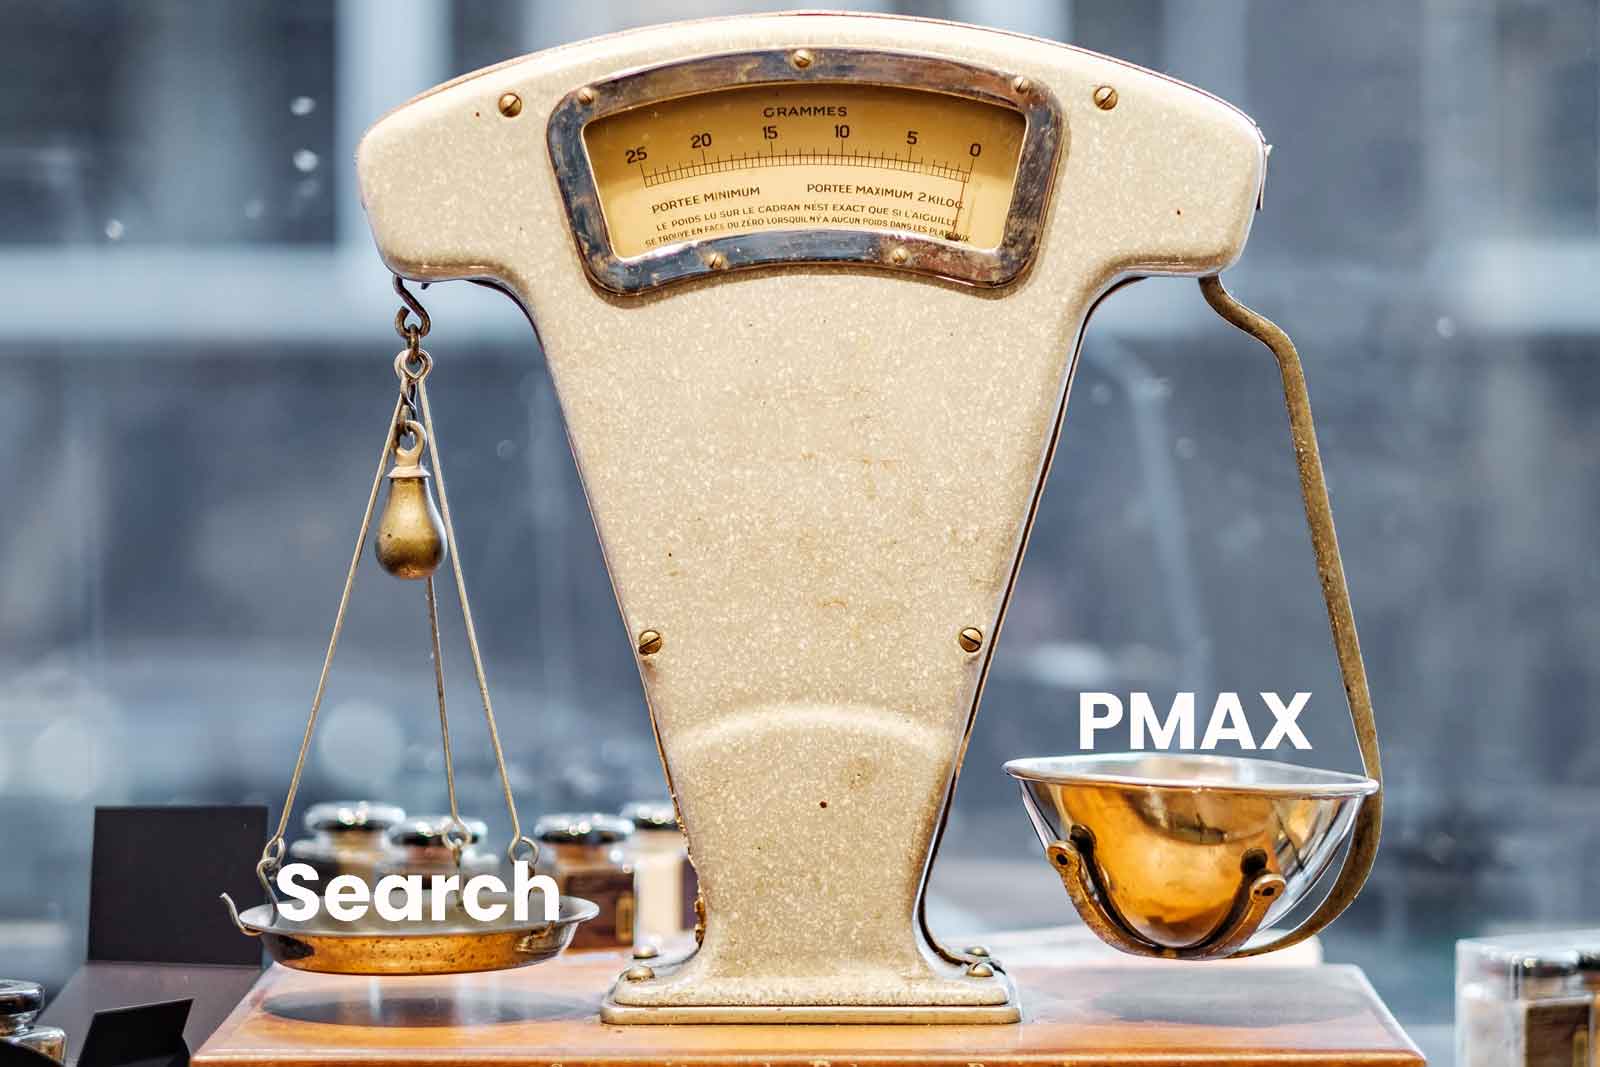 Is Performance Max as good as Search campaigns for lead generation?